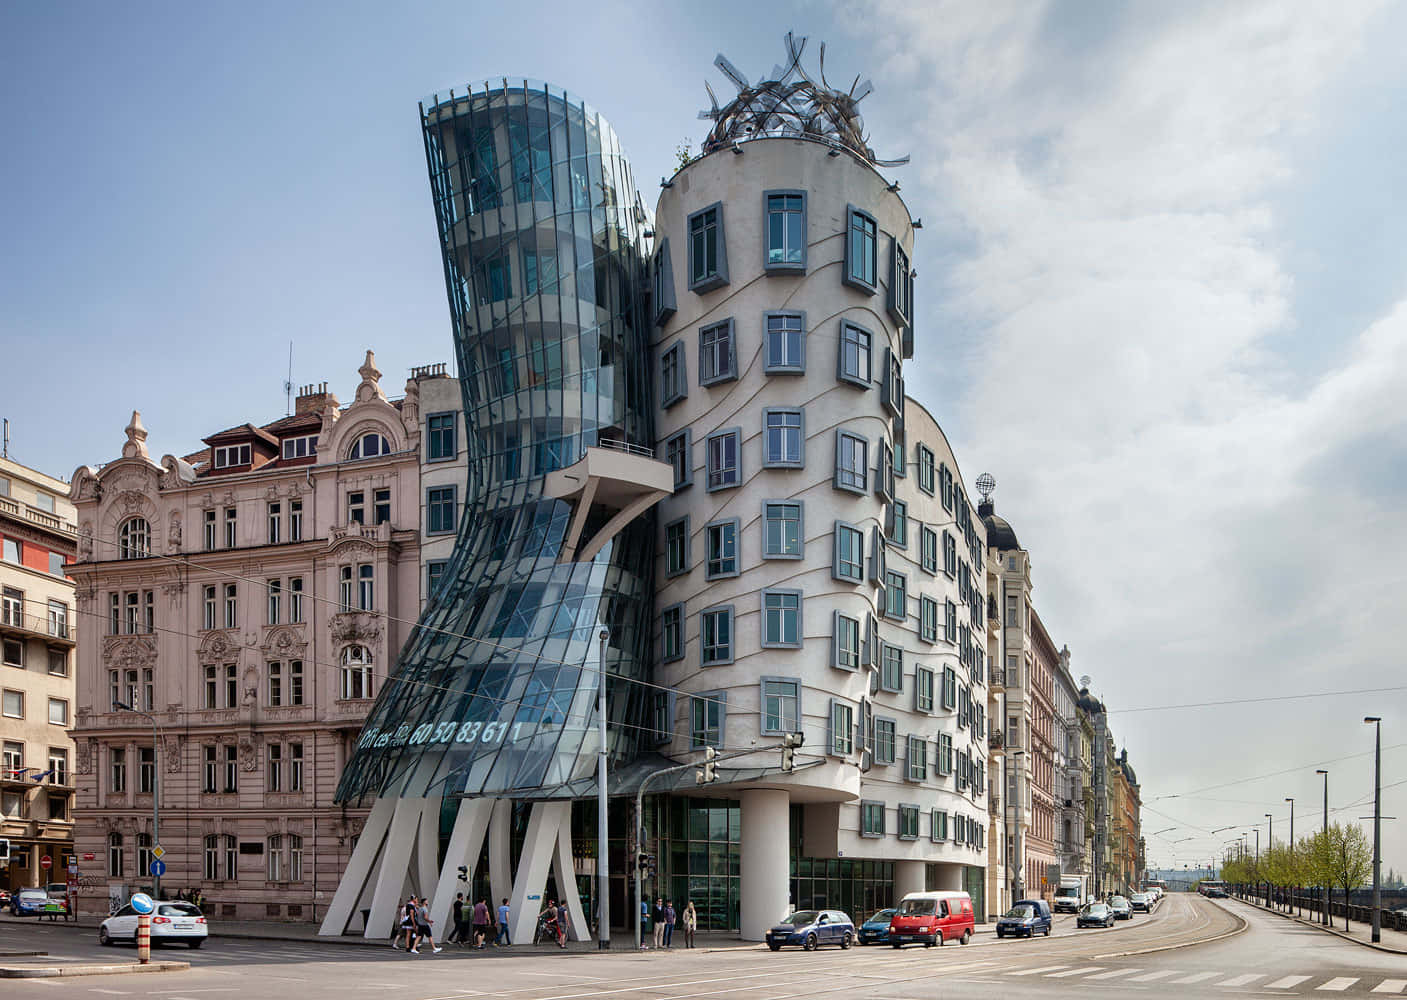 The Dancing House In Gloomy Weather Wallpaper